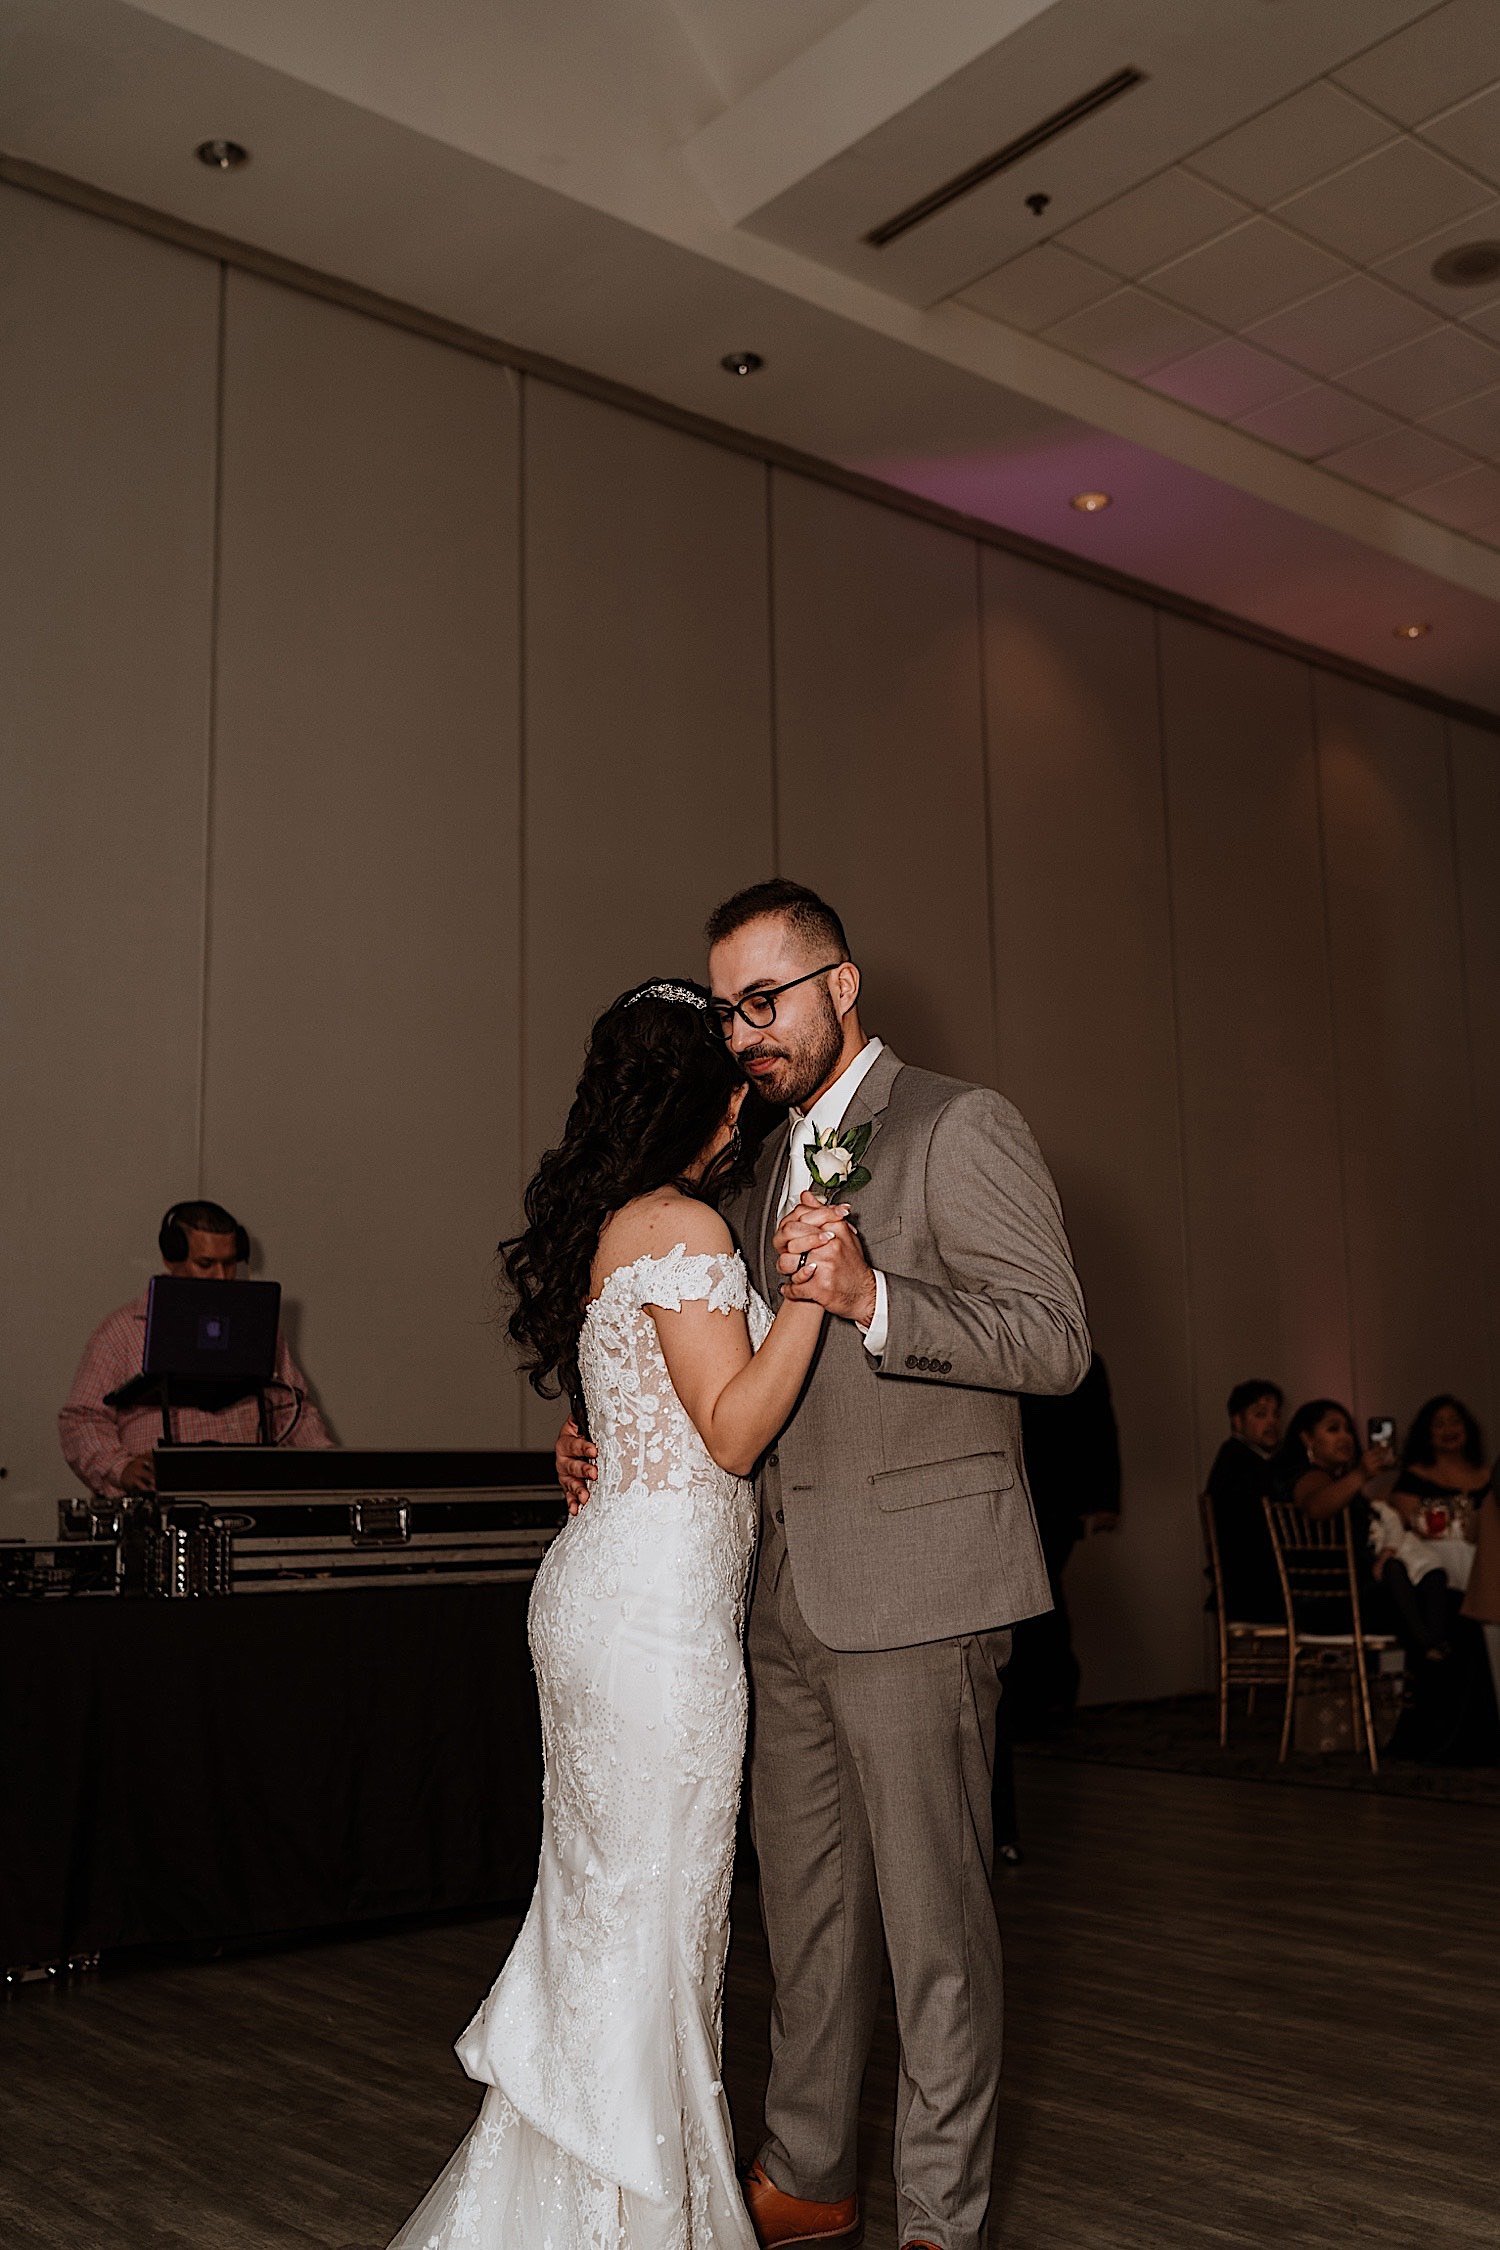 Bride and groom share first dance during wedding reception with guests and the DJ in the background